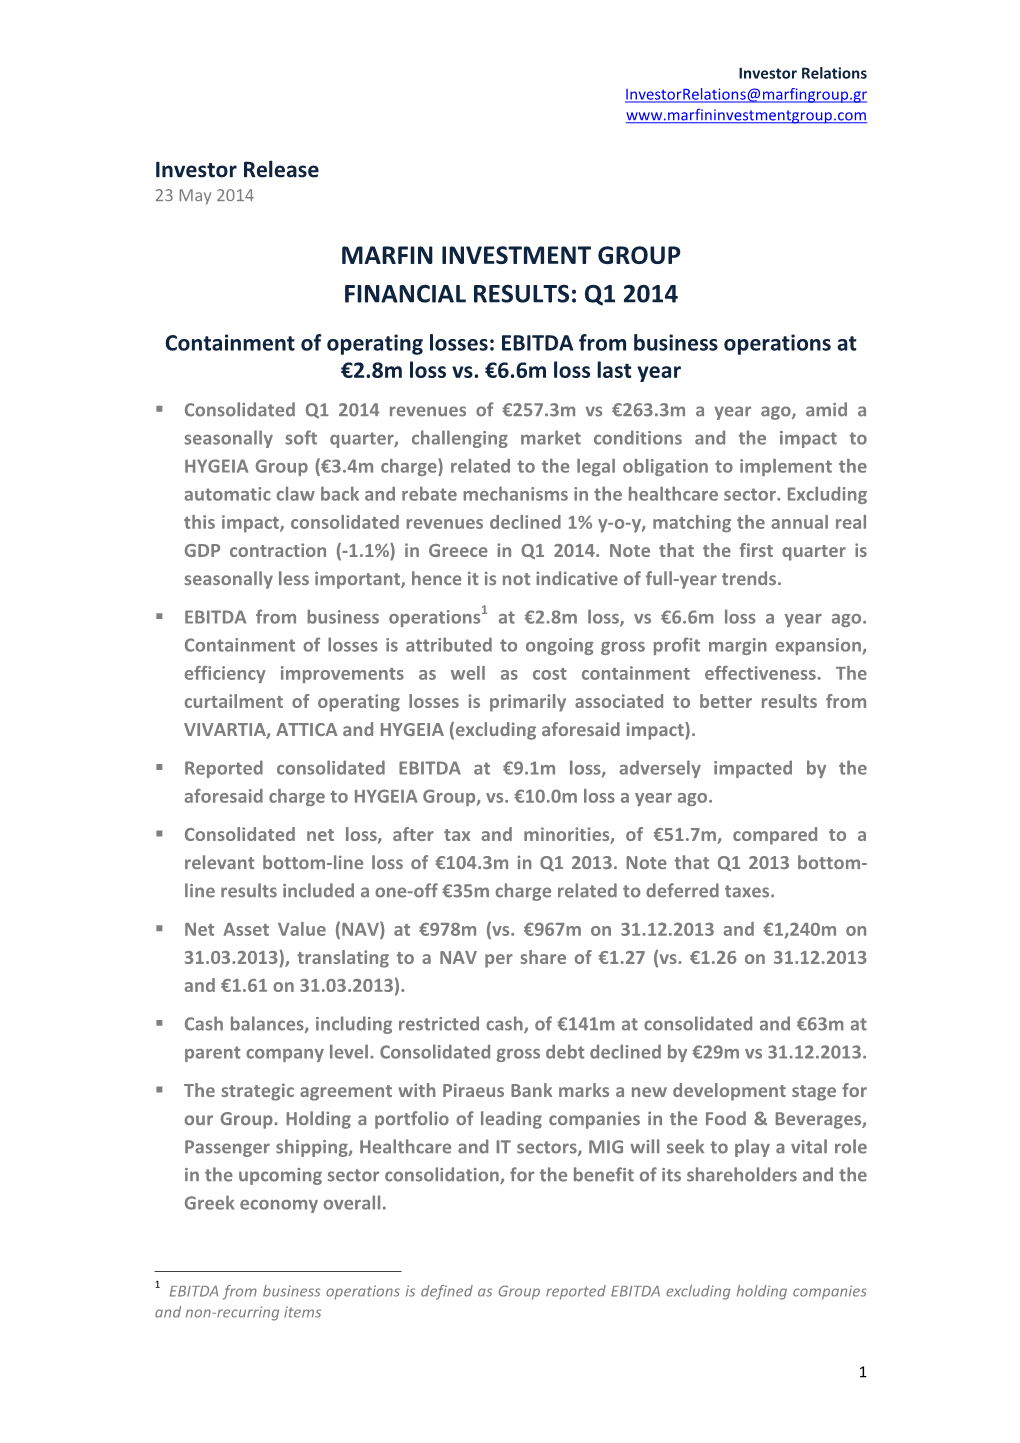 MARFIN INVESTMENT GROUP FINANCIAL RESULTS: Q1 2014 Containment of Operating Losses: EBITDA from Business Operations at €2.8M Loss Vs